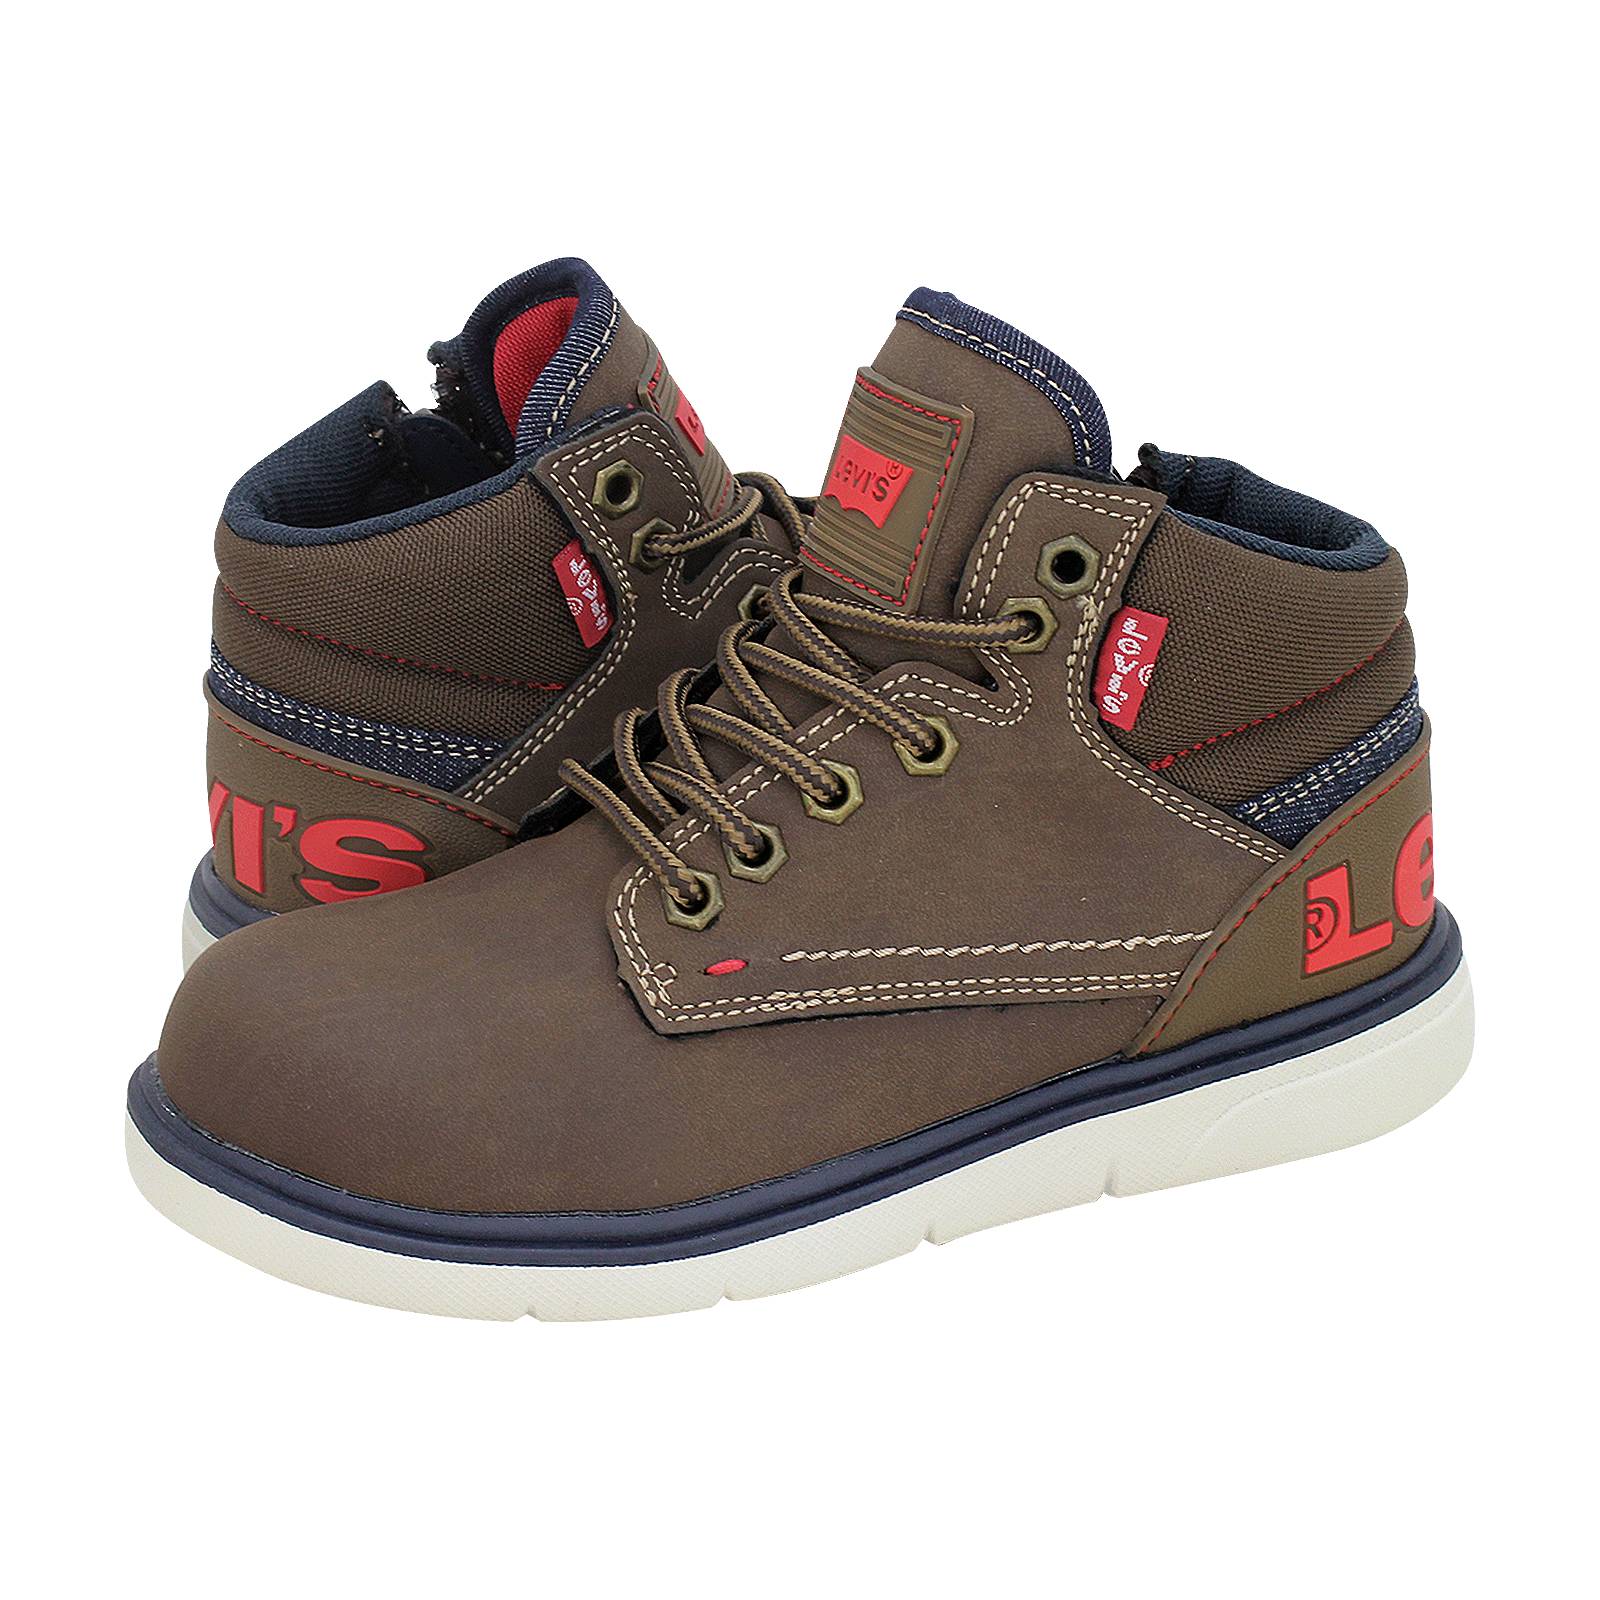 Olympus S - Levi's Kids' low boots made 